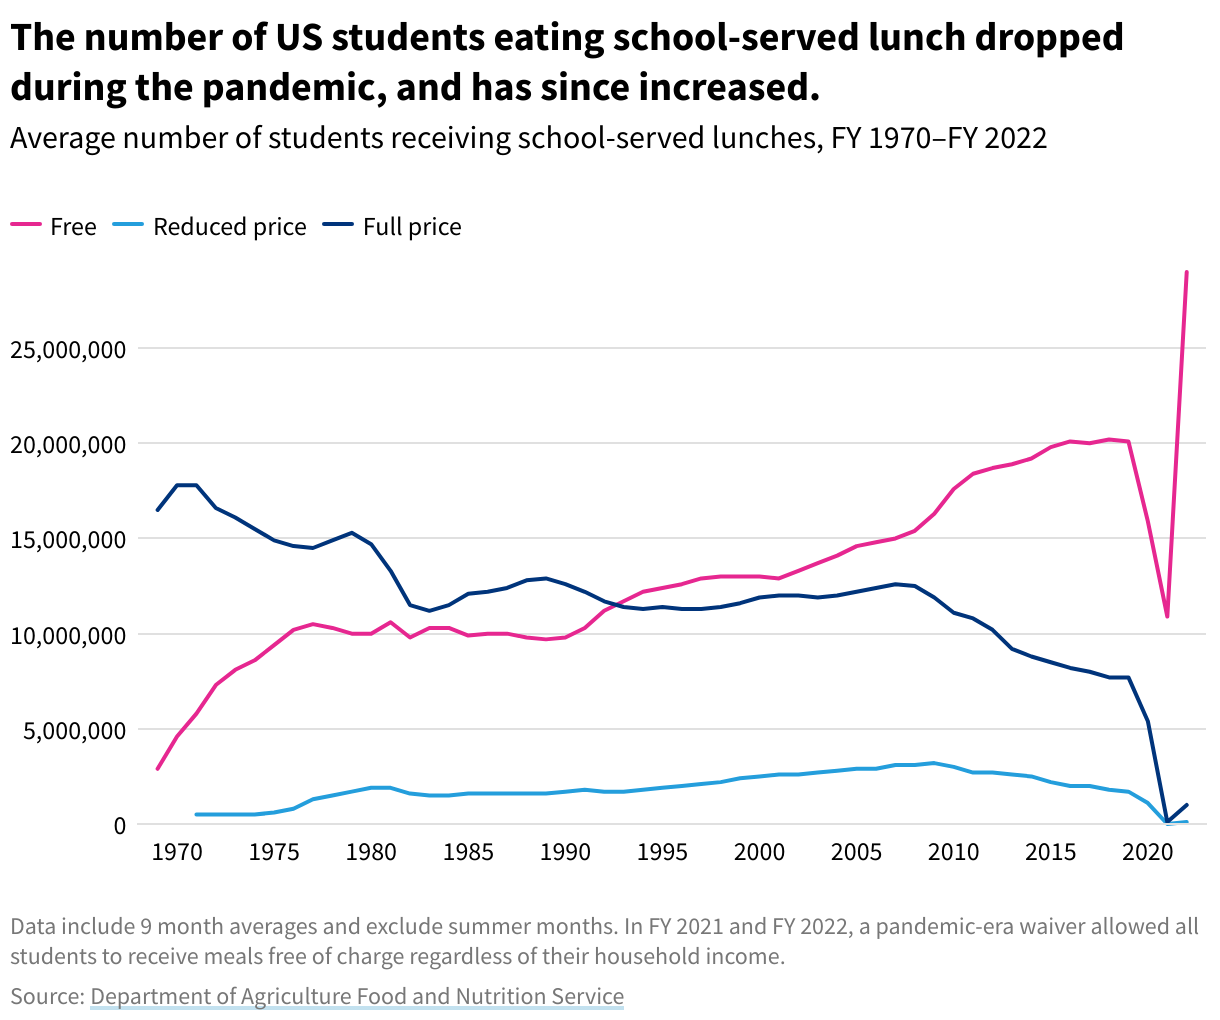 Line graph showing the number of US students in millions receiving full-price, free, and reduced price school-served lunches, 1970-2022. 